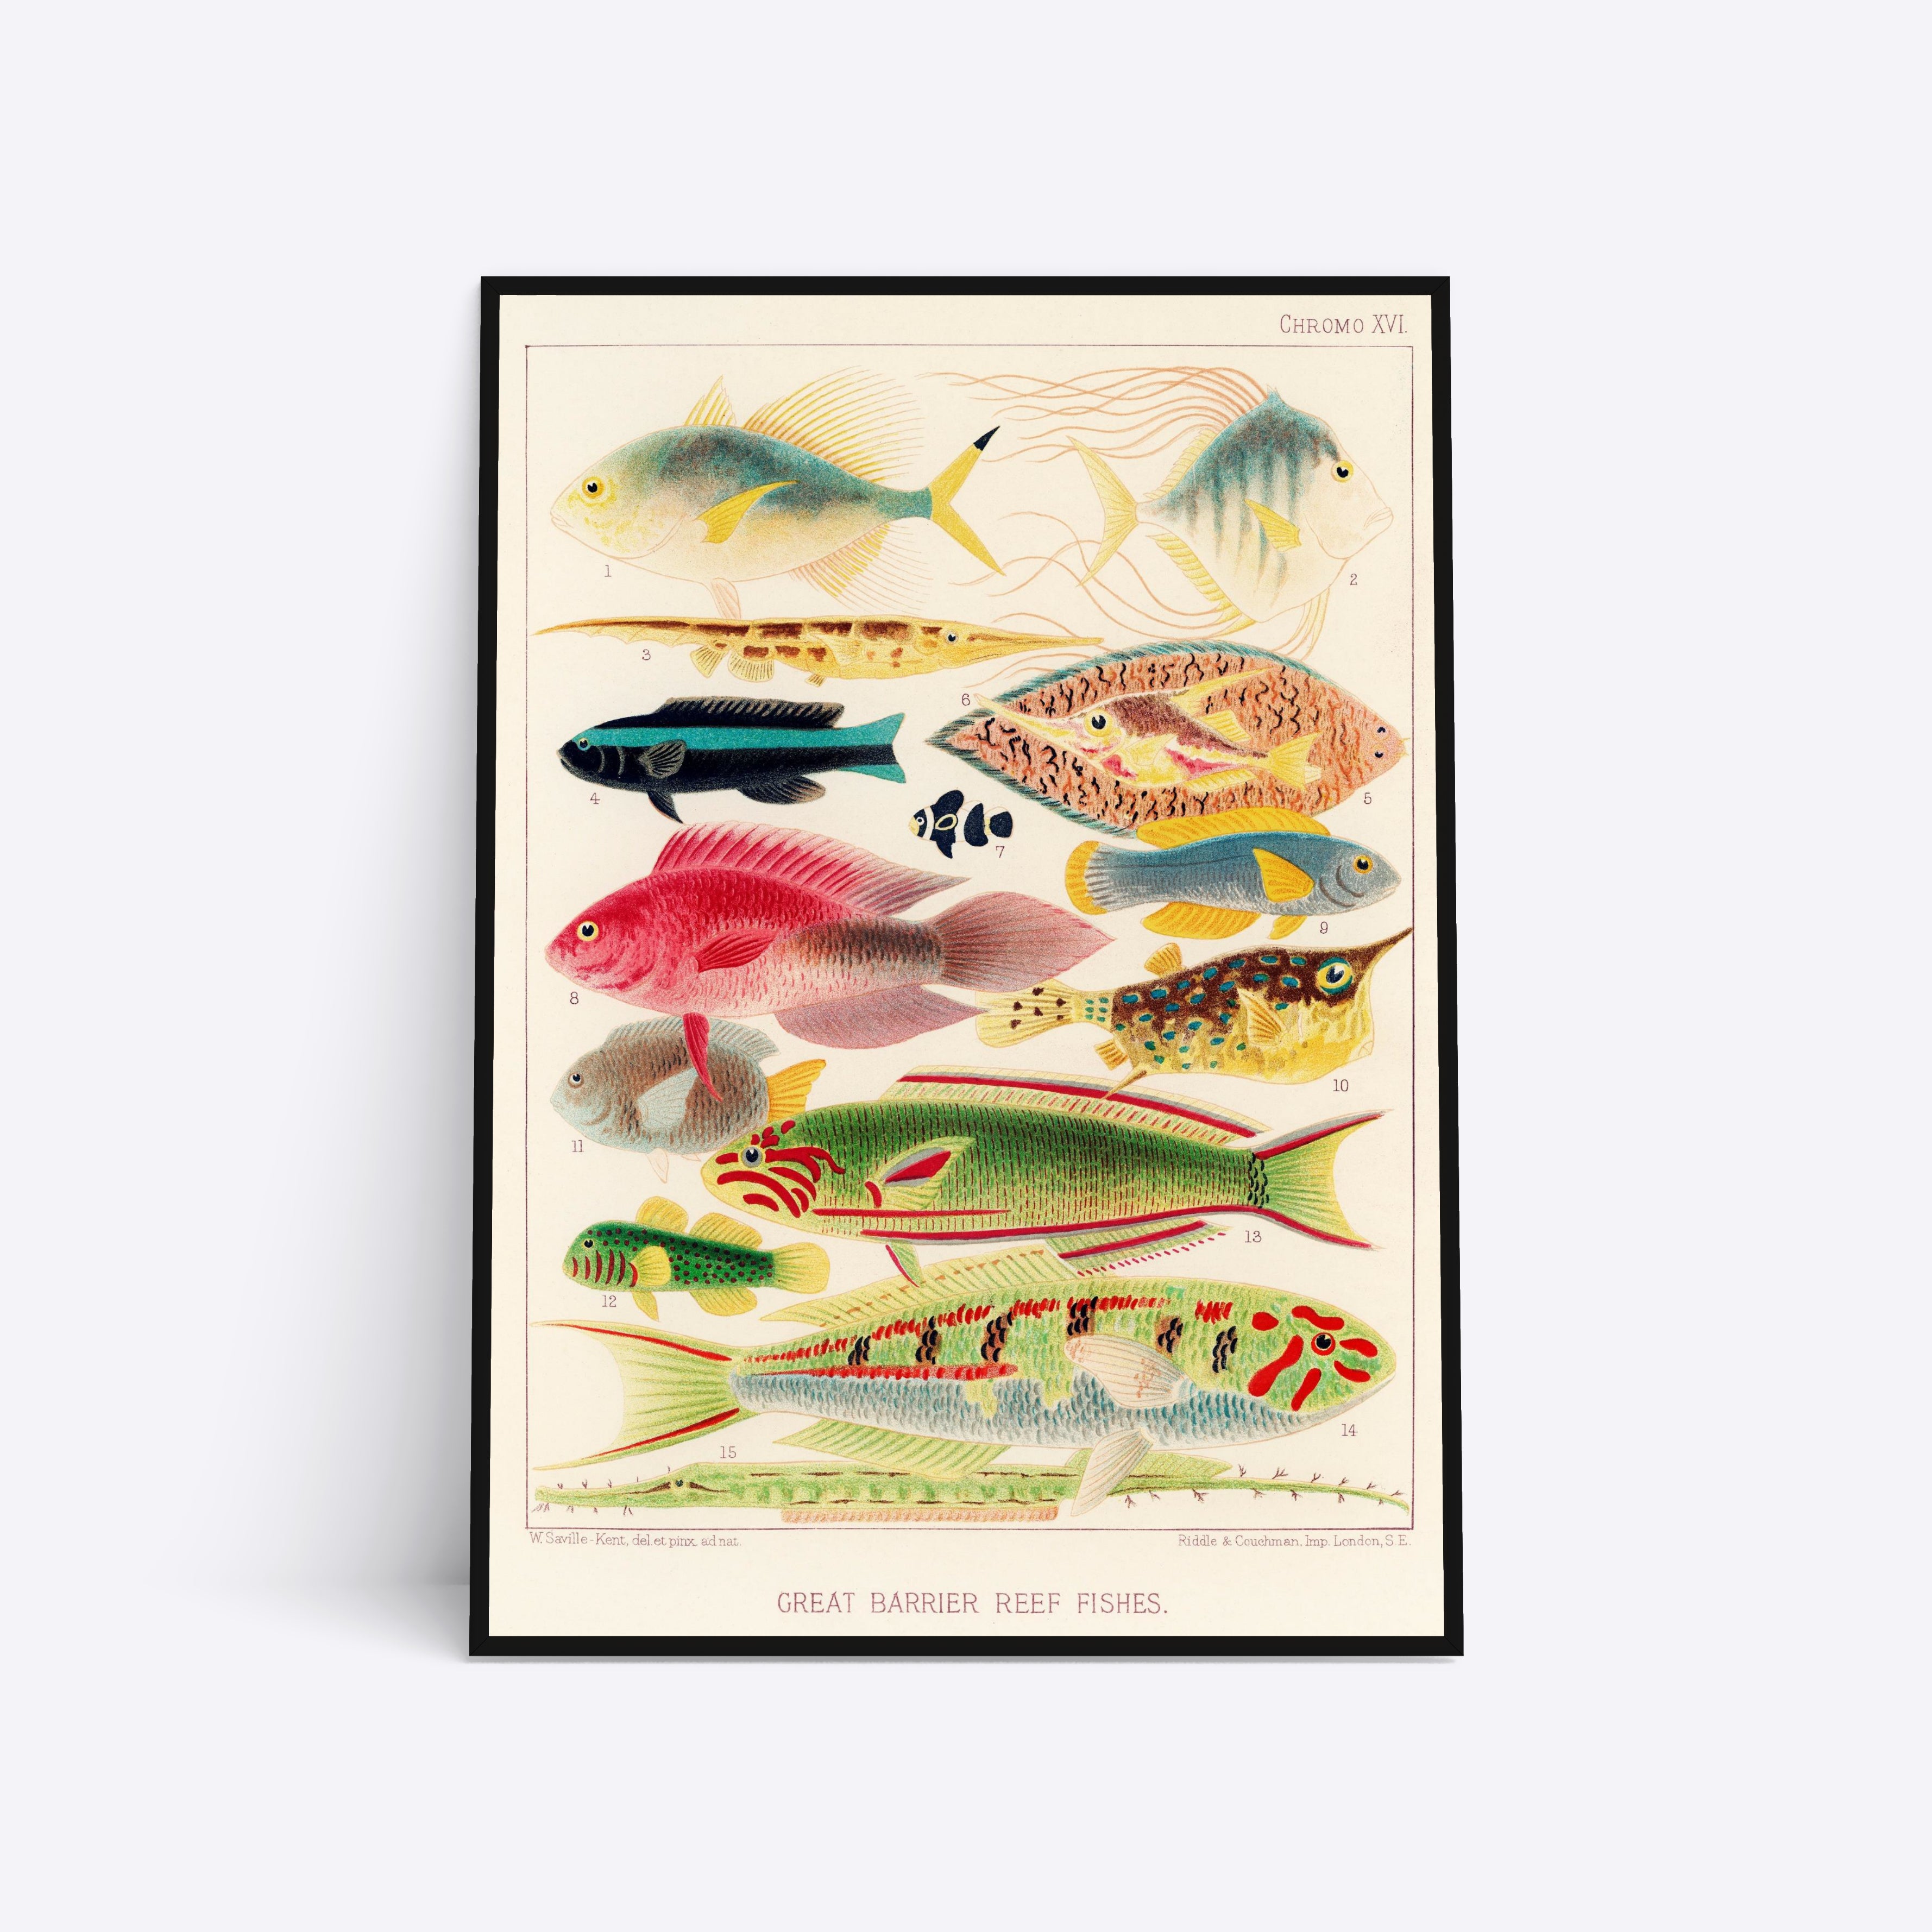 Great Barrier Reef Fishes Vol. 2 illustration plakat i ramme